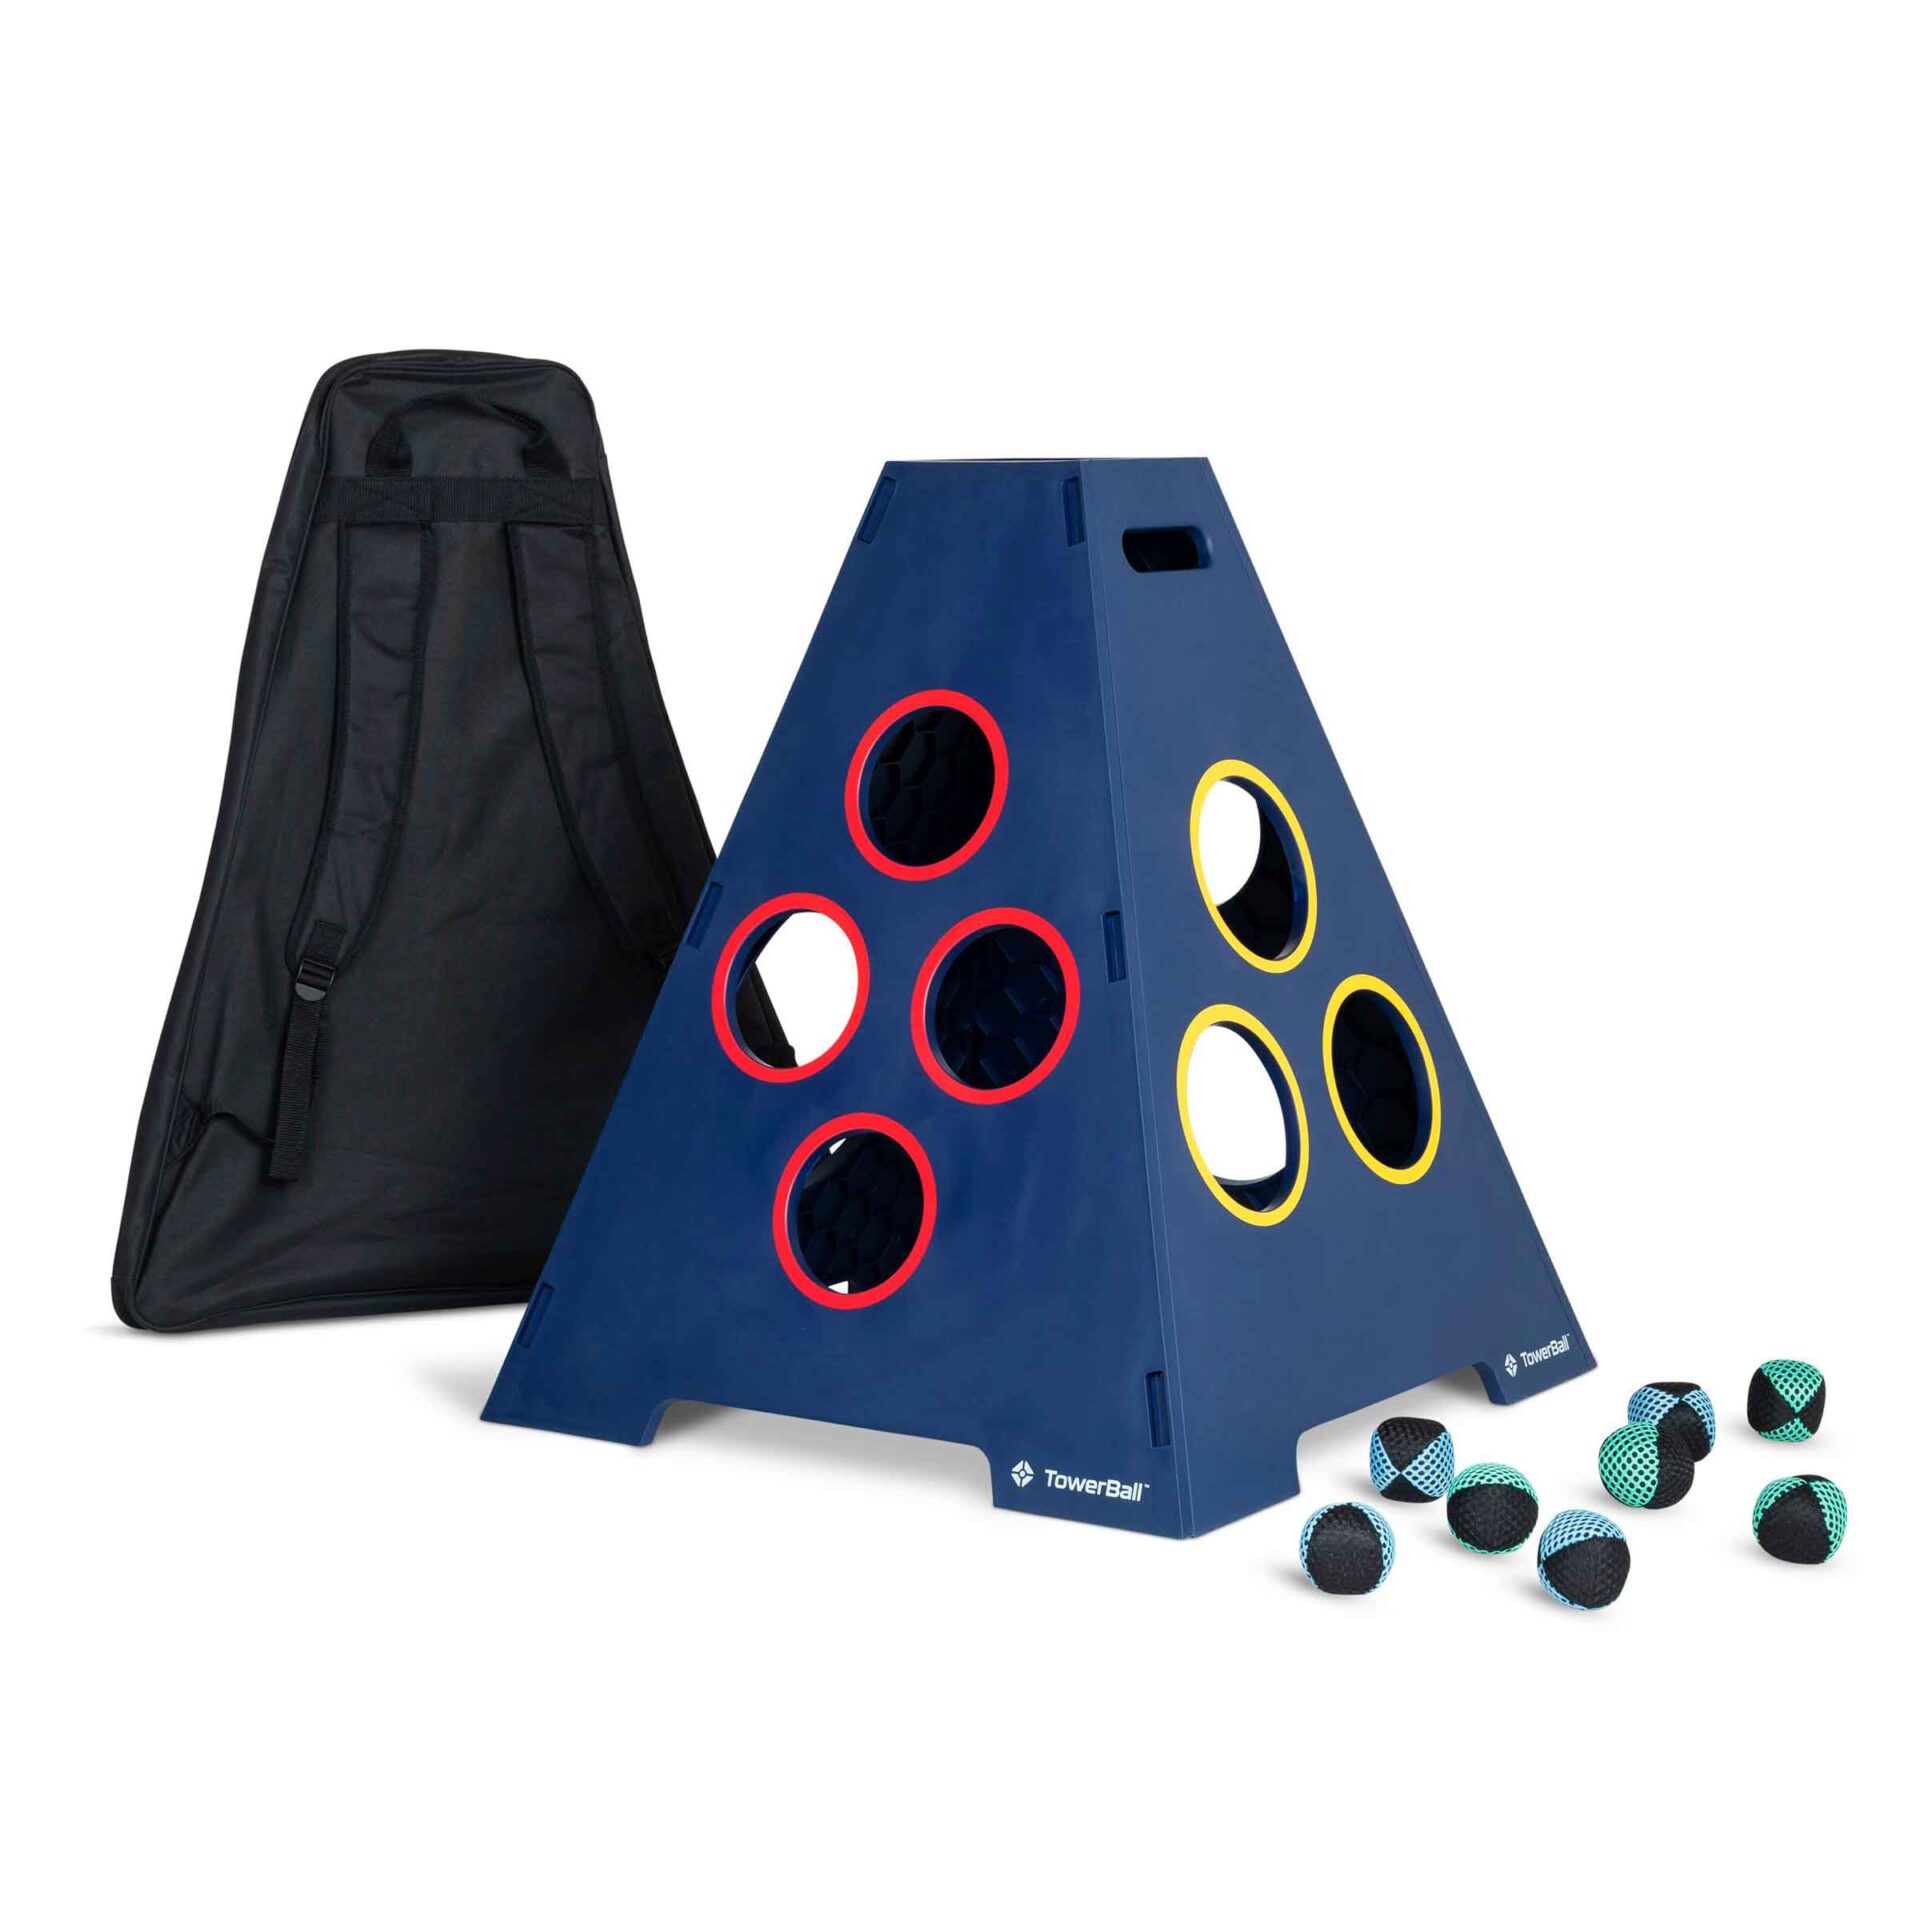 TowerBall yard game comes with a four-sided, 360-degree collapsible tower with a range of one-to-four holes on each side, and 8 soft balls.